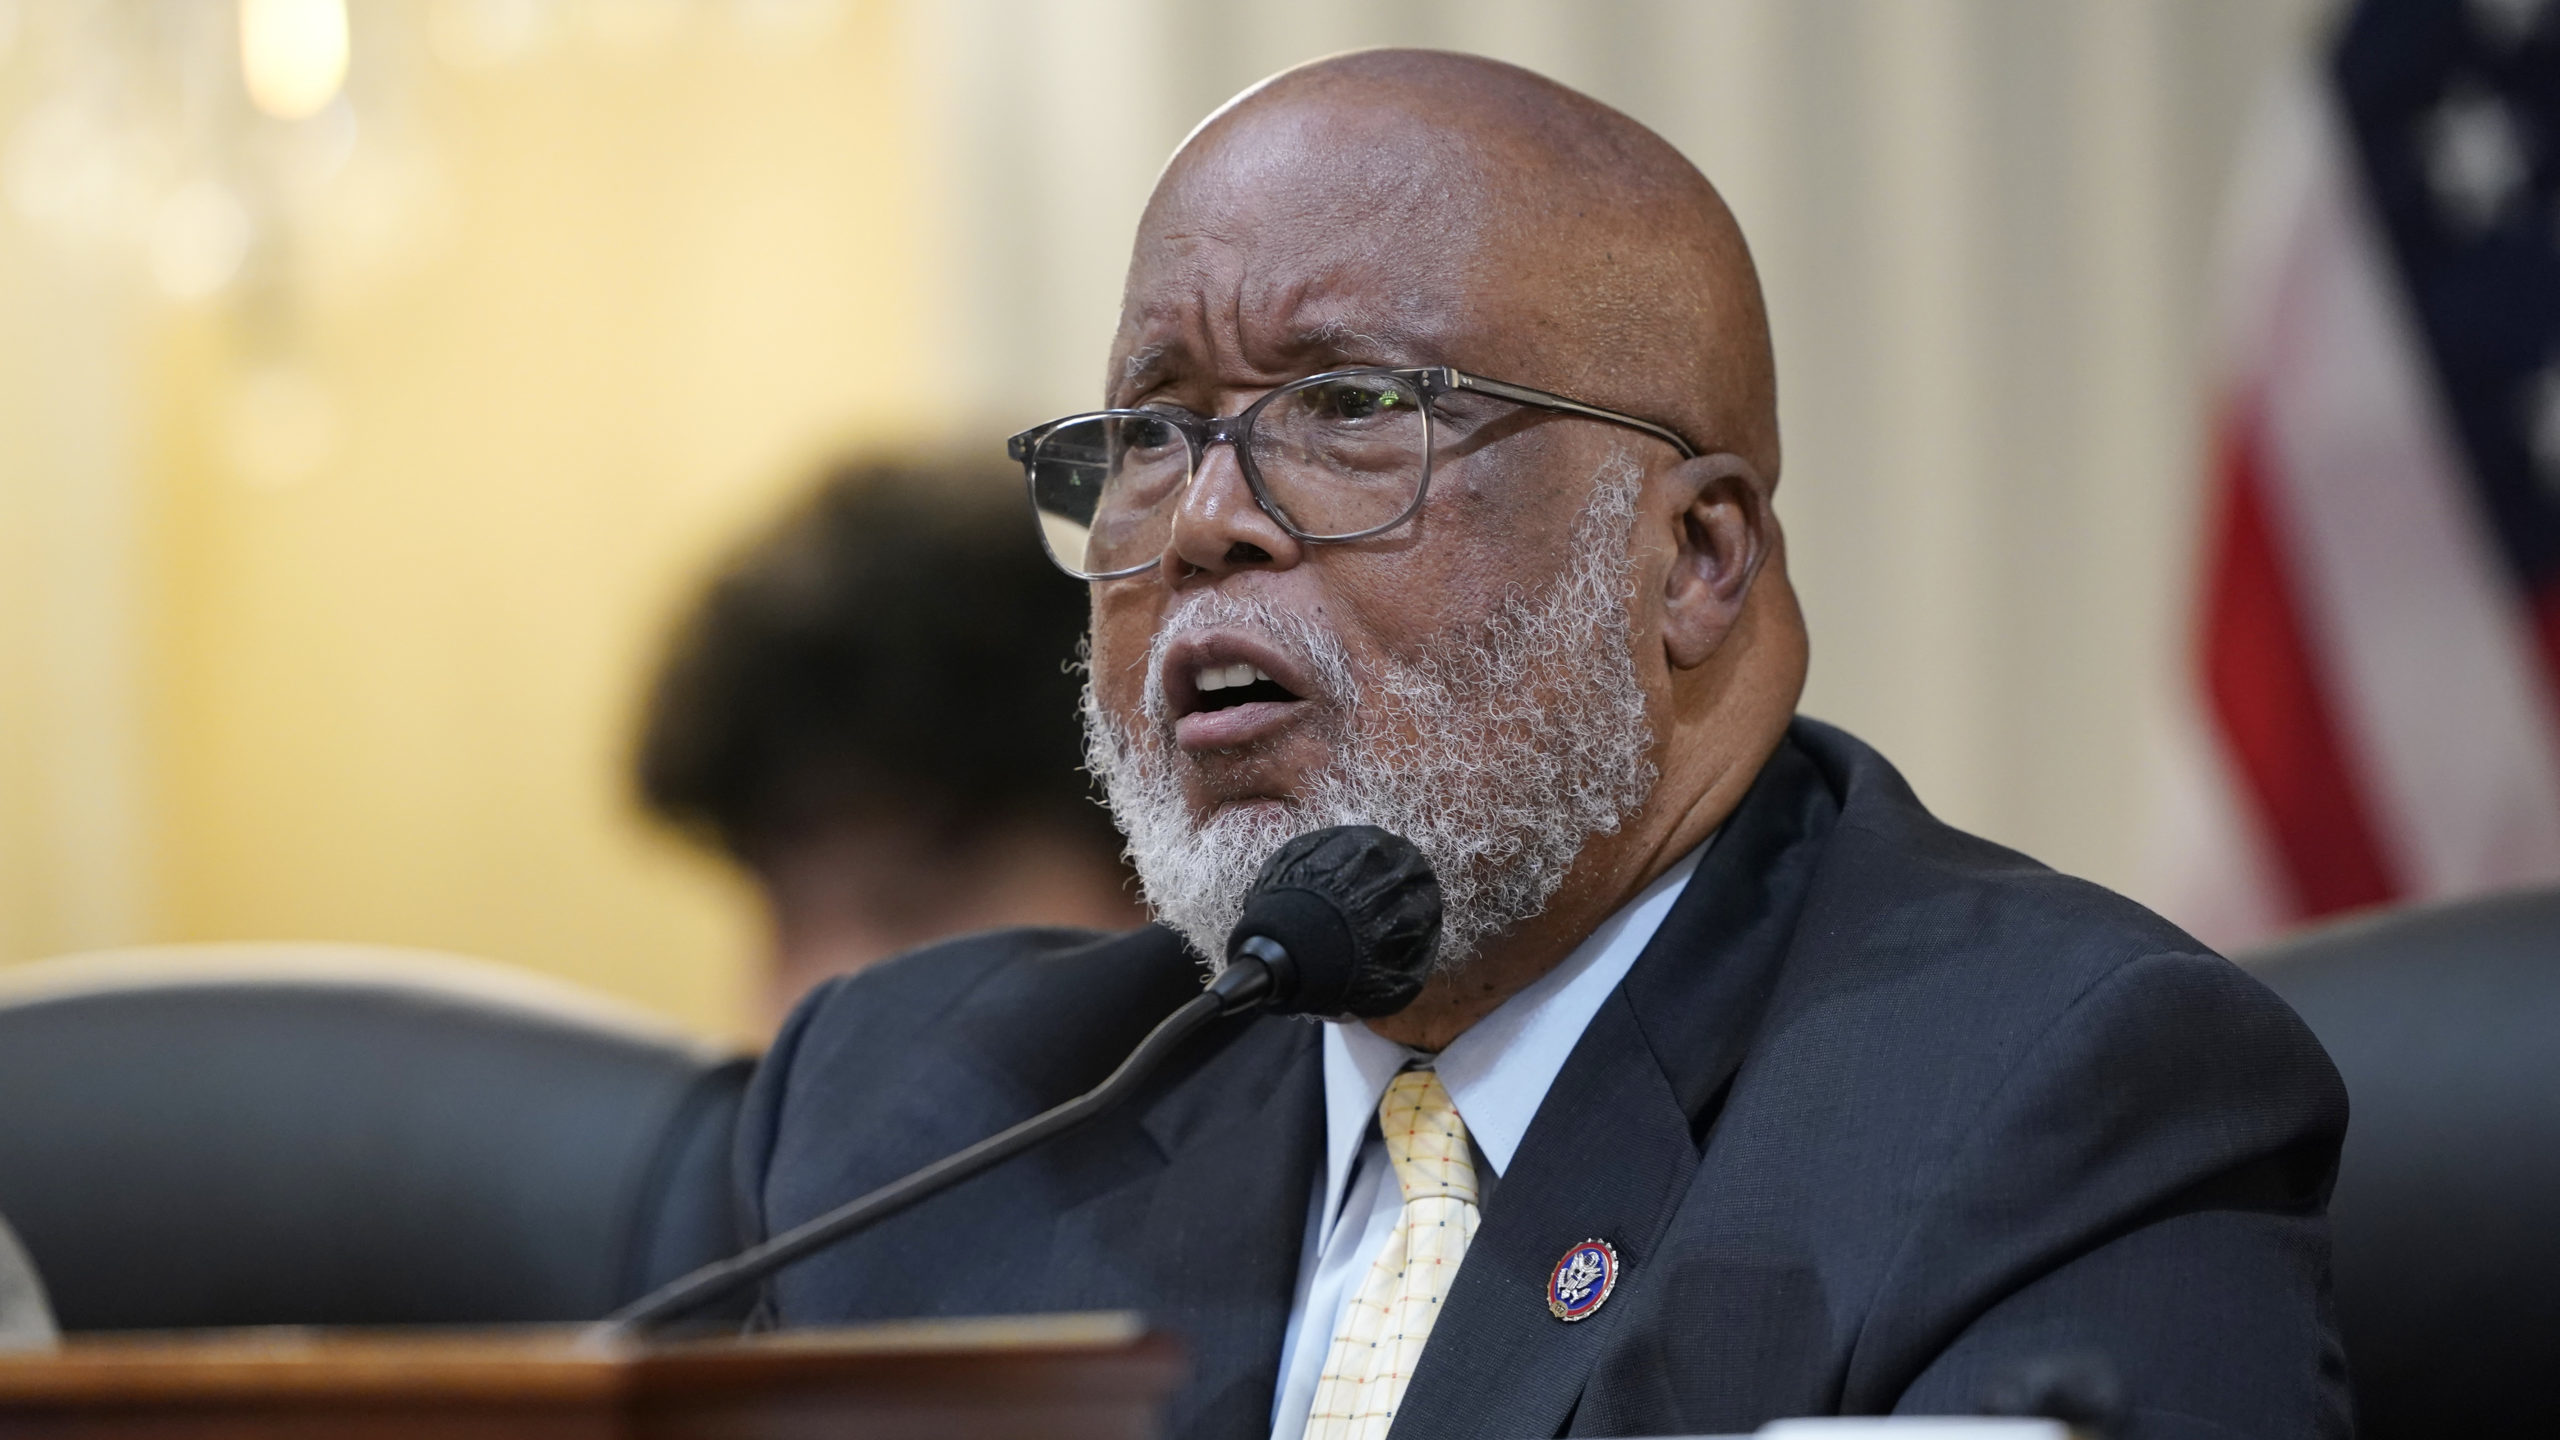 Committee chairman Rep. Bennie Thompson, D-Miss., gives opening remarks as the House select committ...